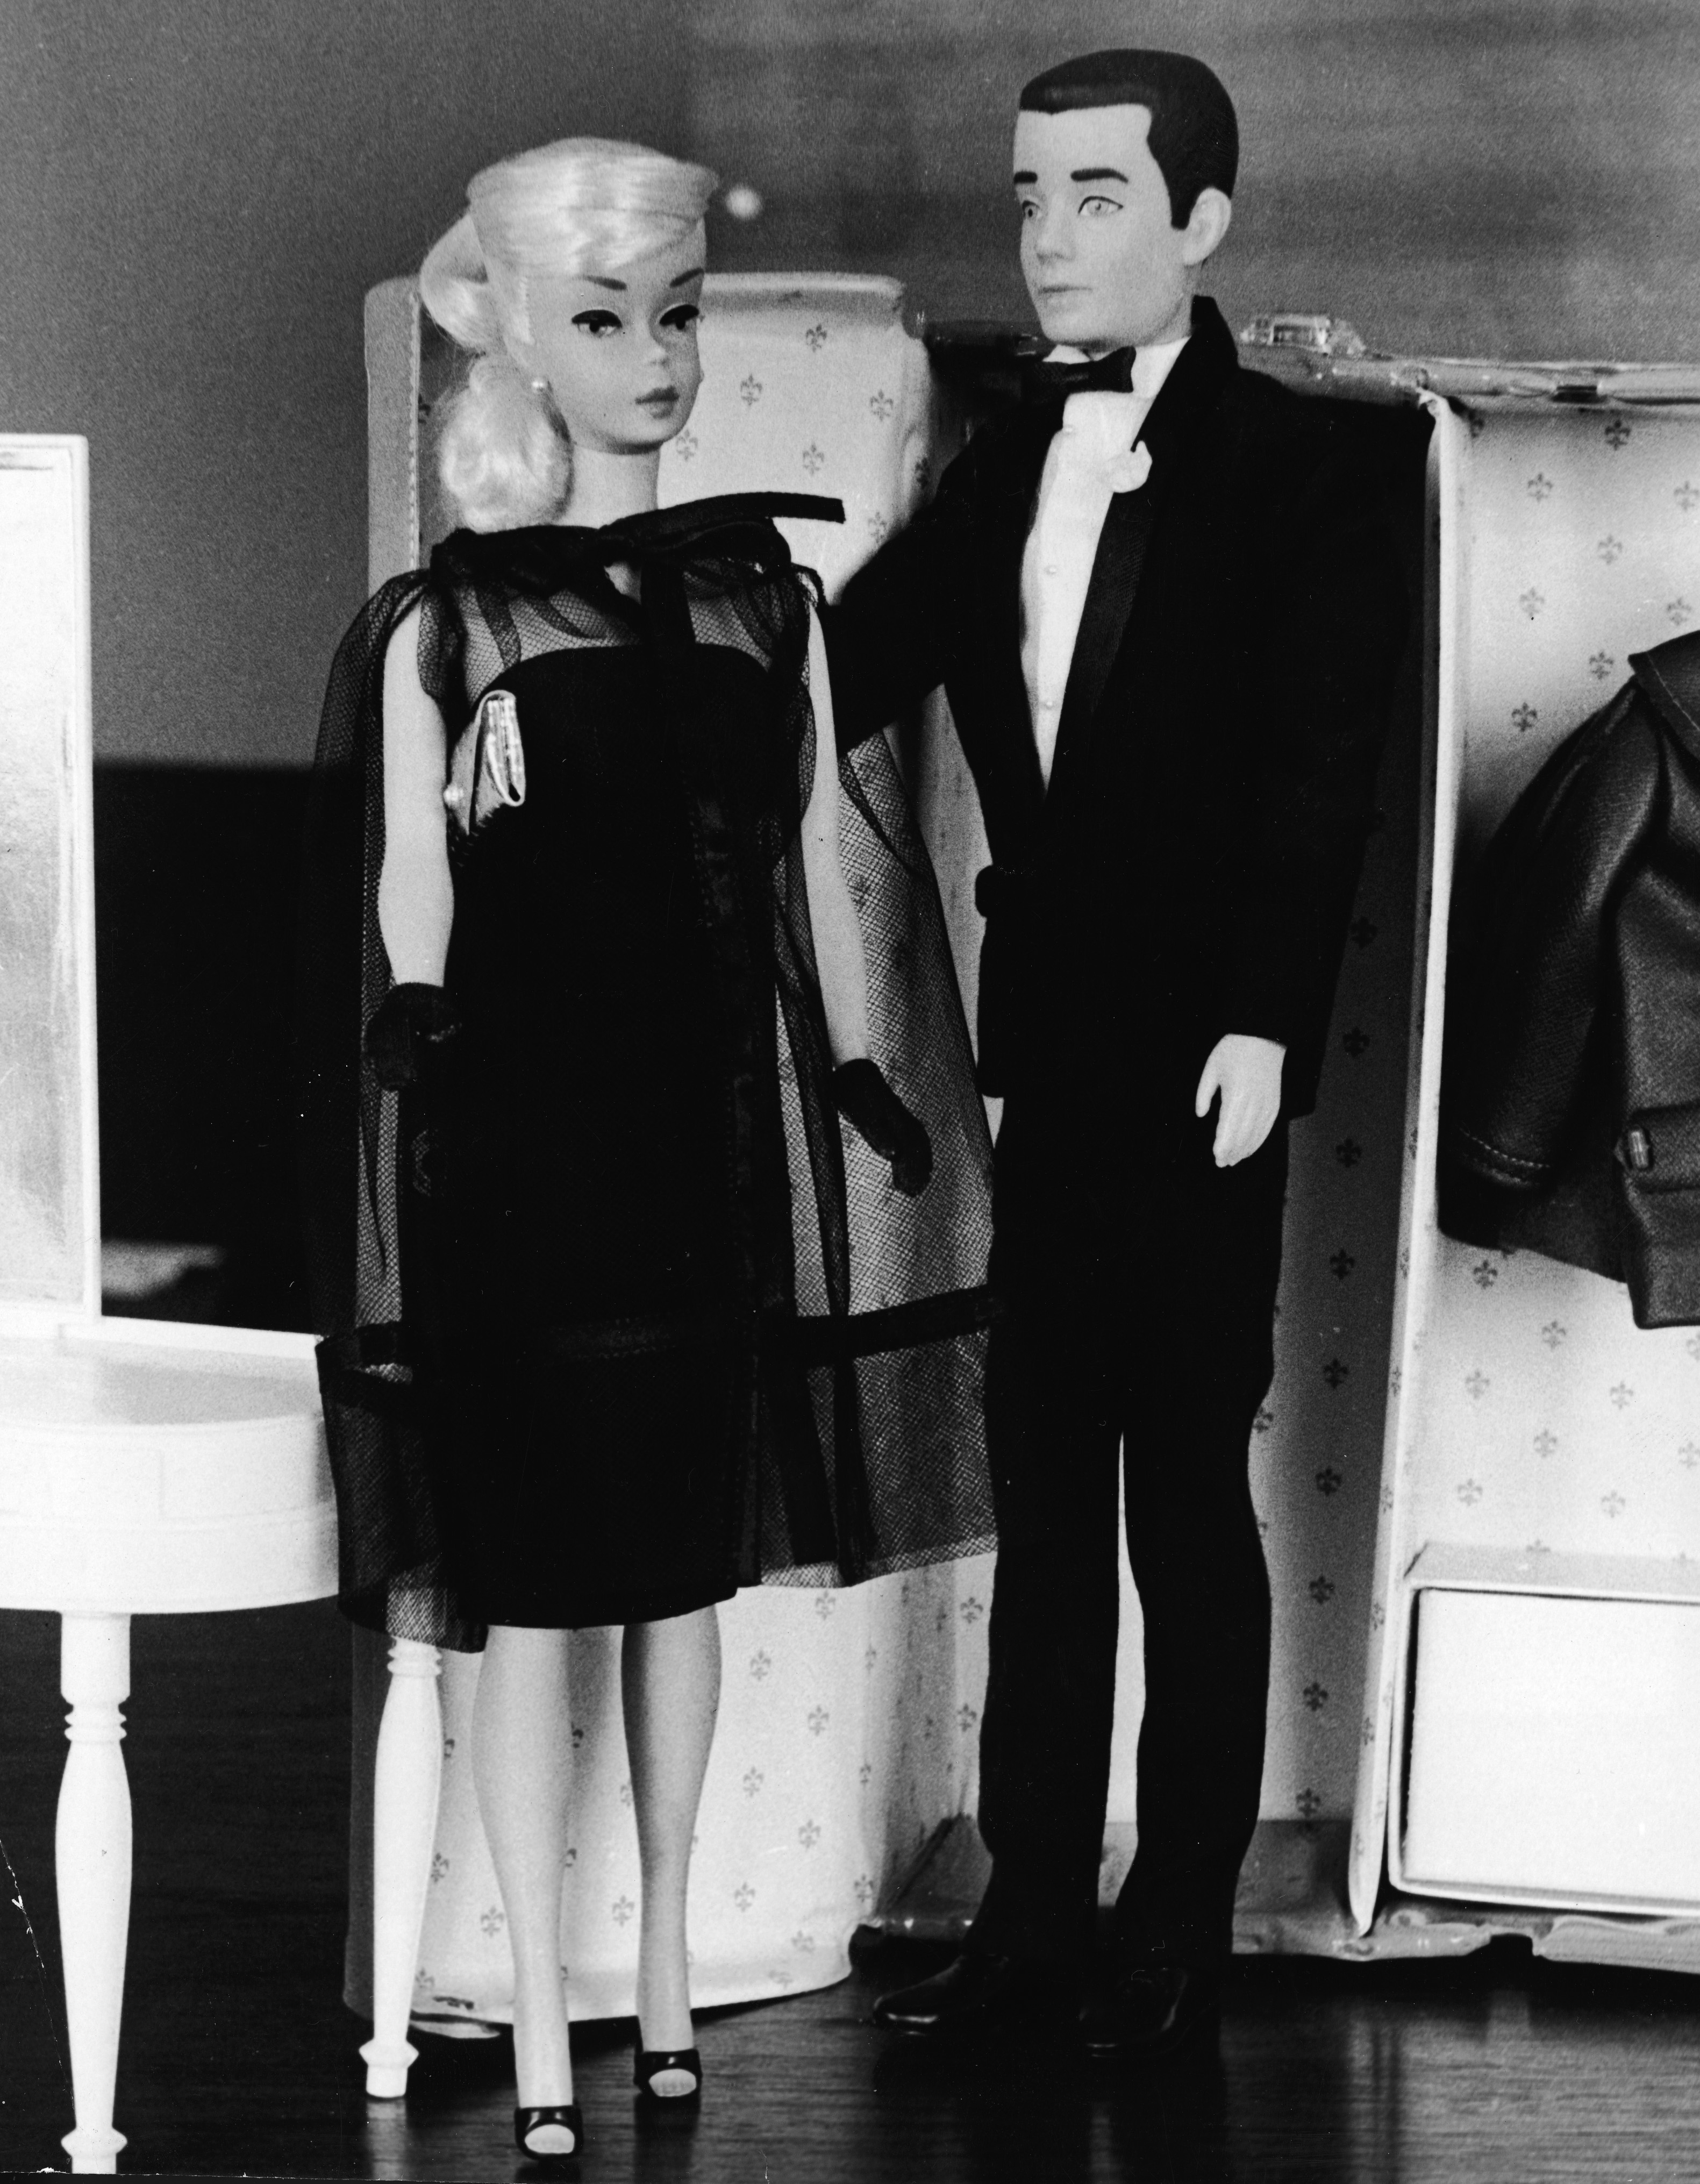 Barbie and Ken, in formal wear, stand together in front of a toy closet, December 15, 1964